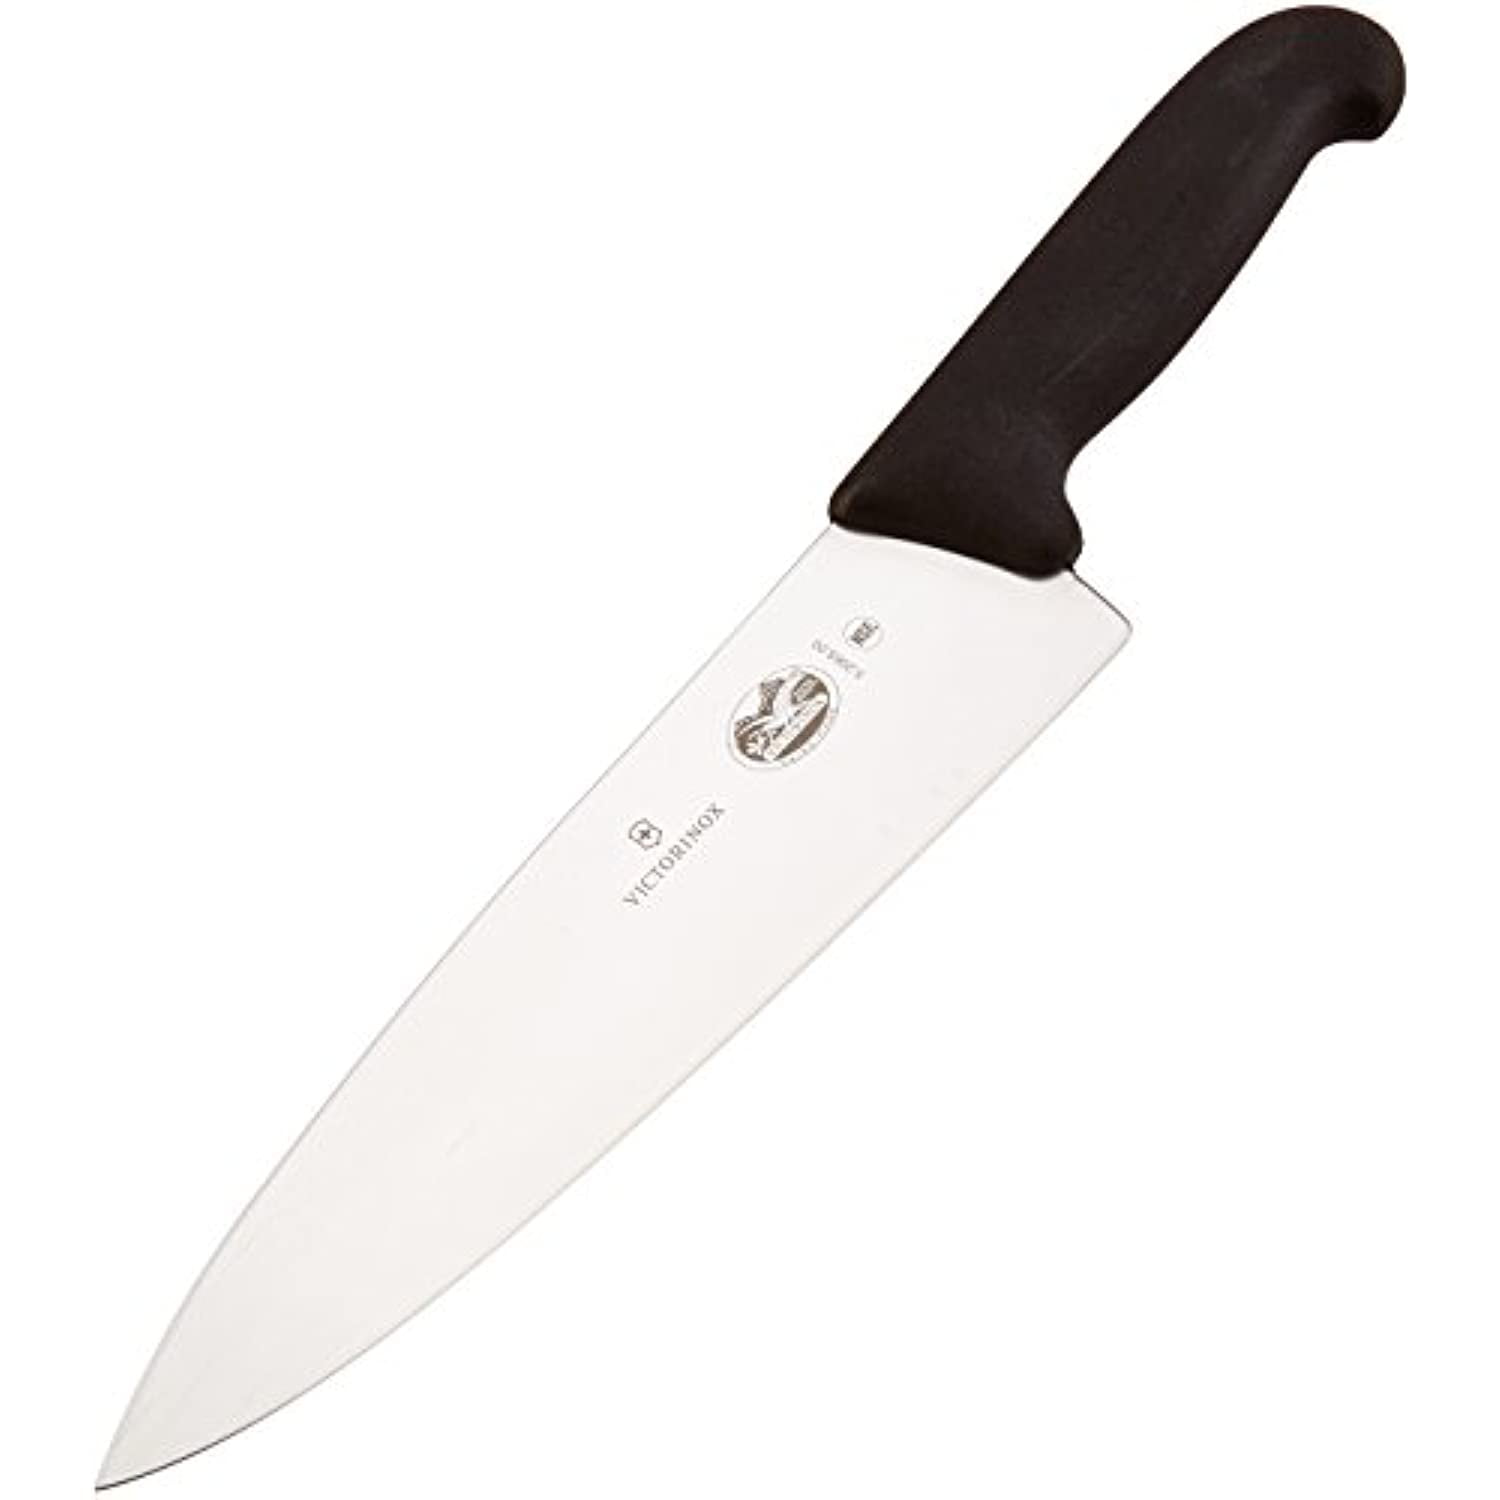 Victorinox 8 Chinese Cleaver with Black Polypropylene Handle